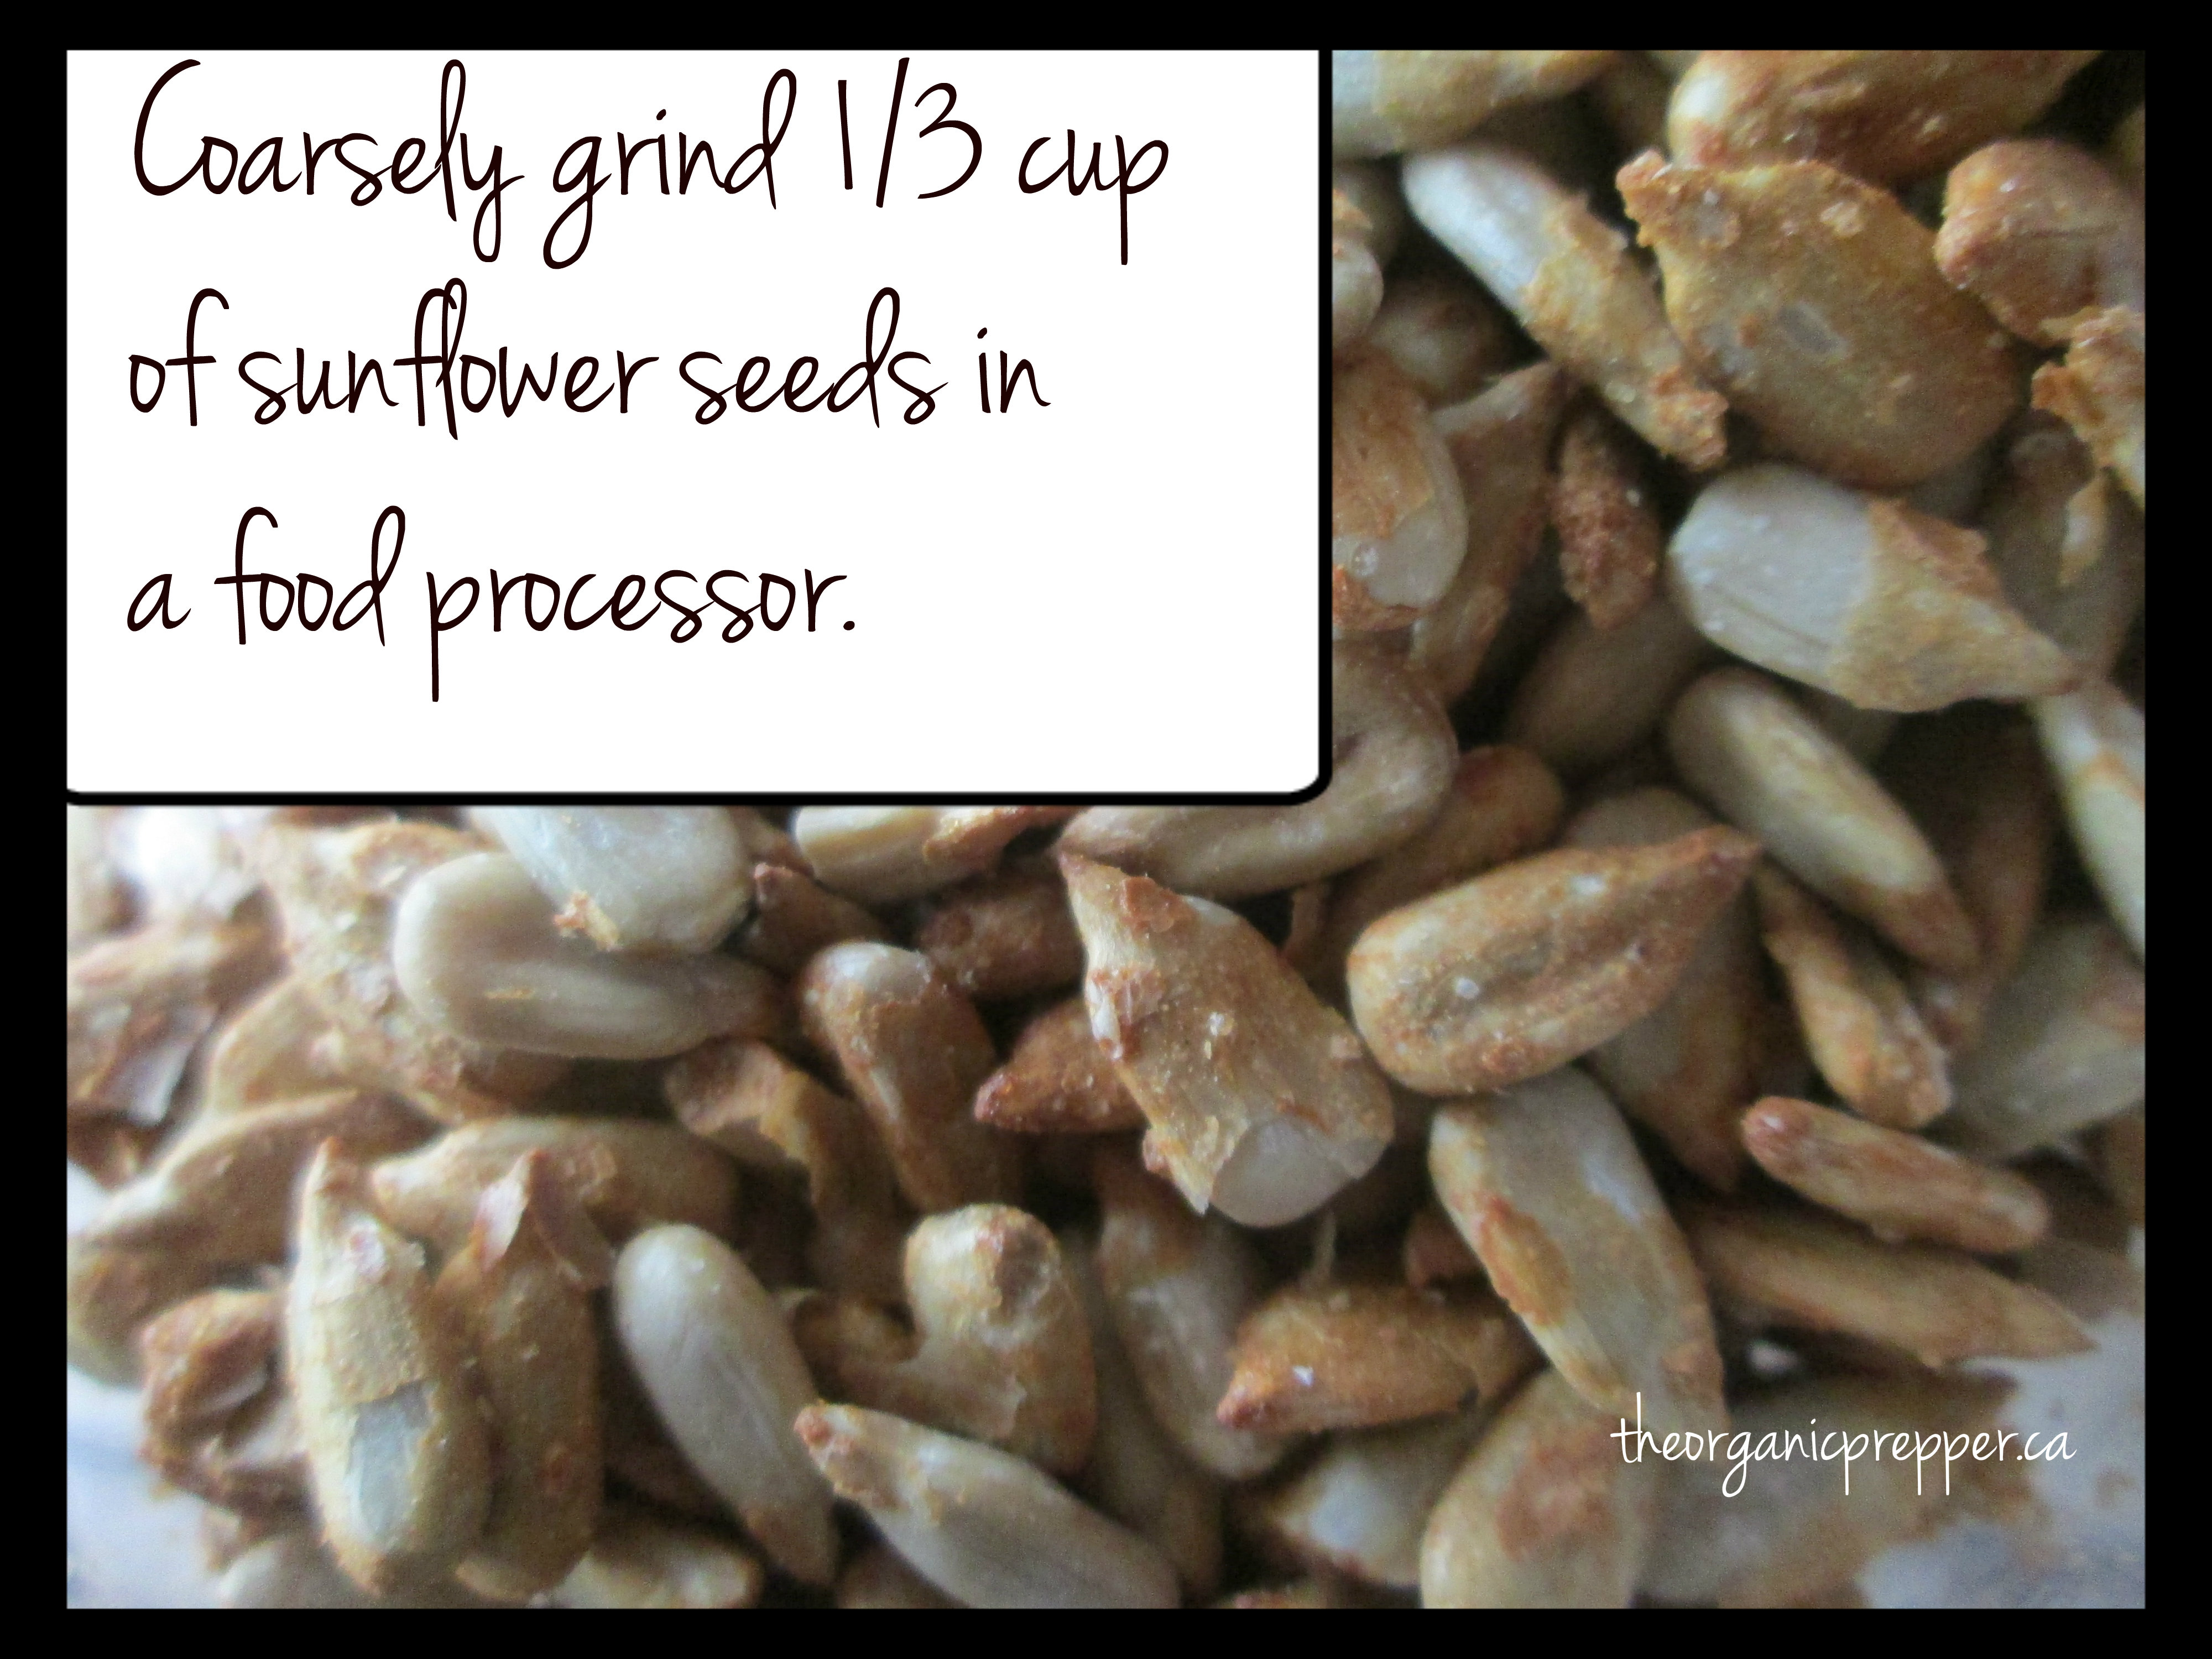 What is a recipe to roast sunflower seeds at home?